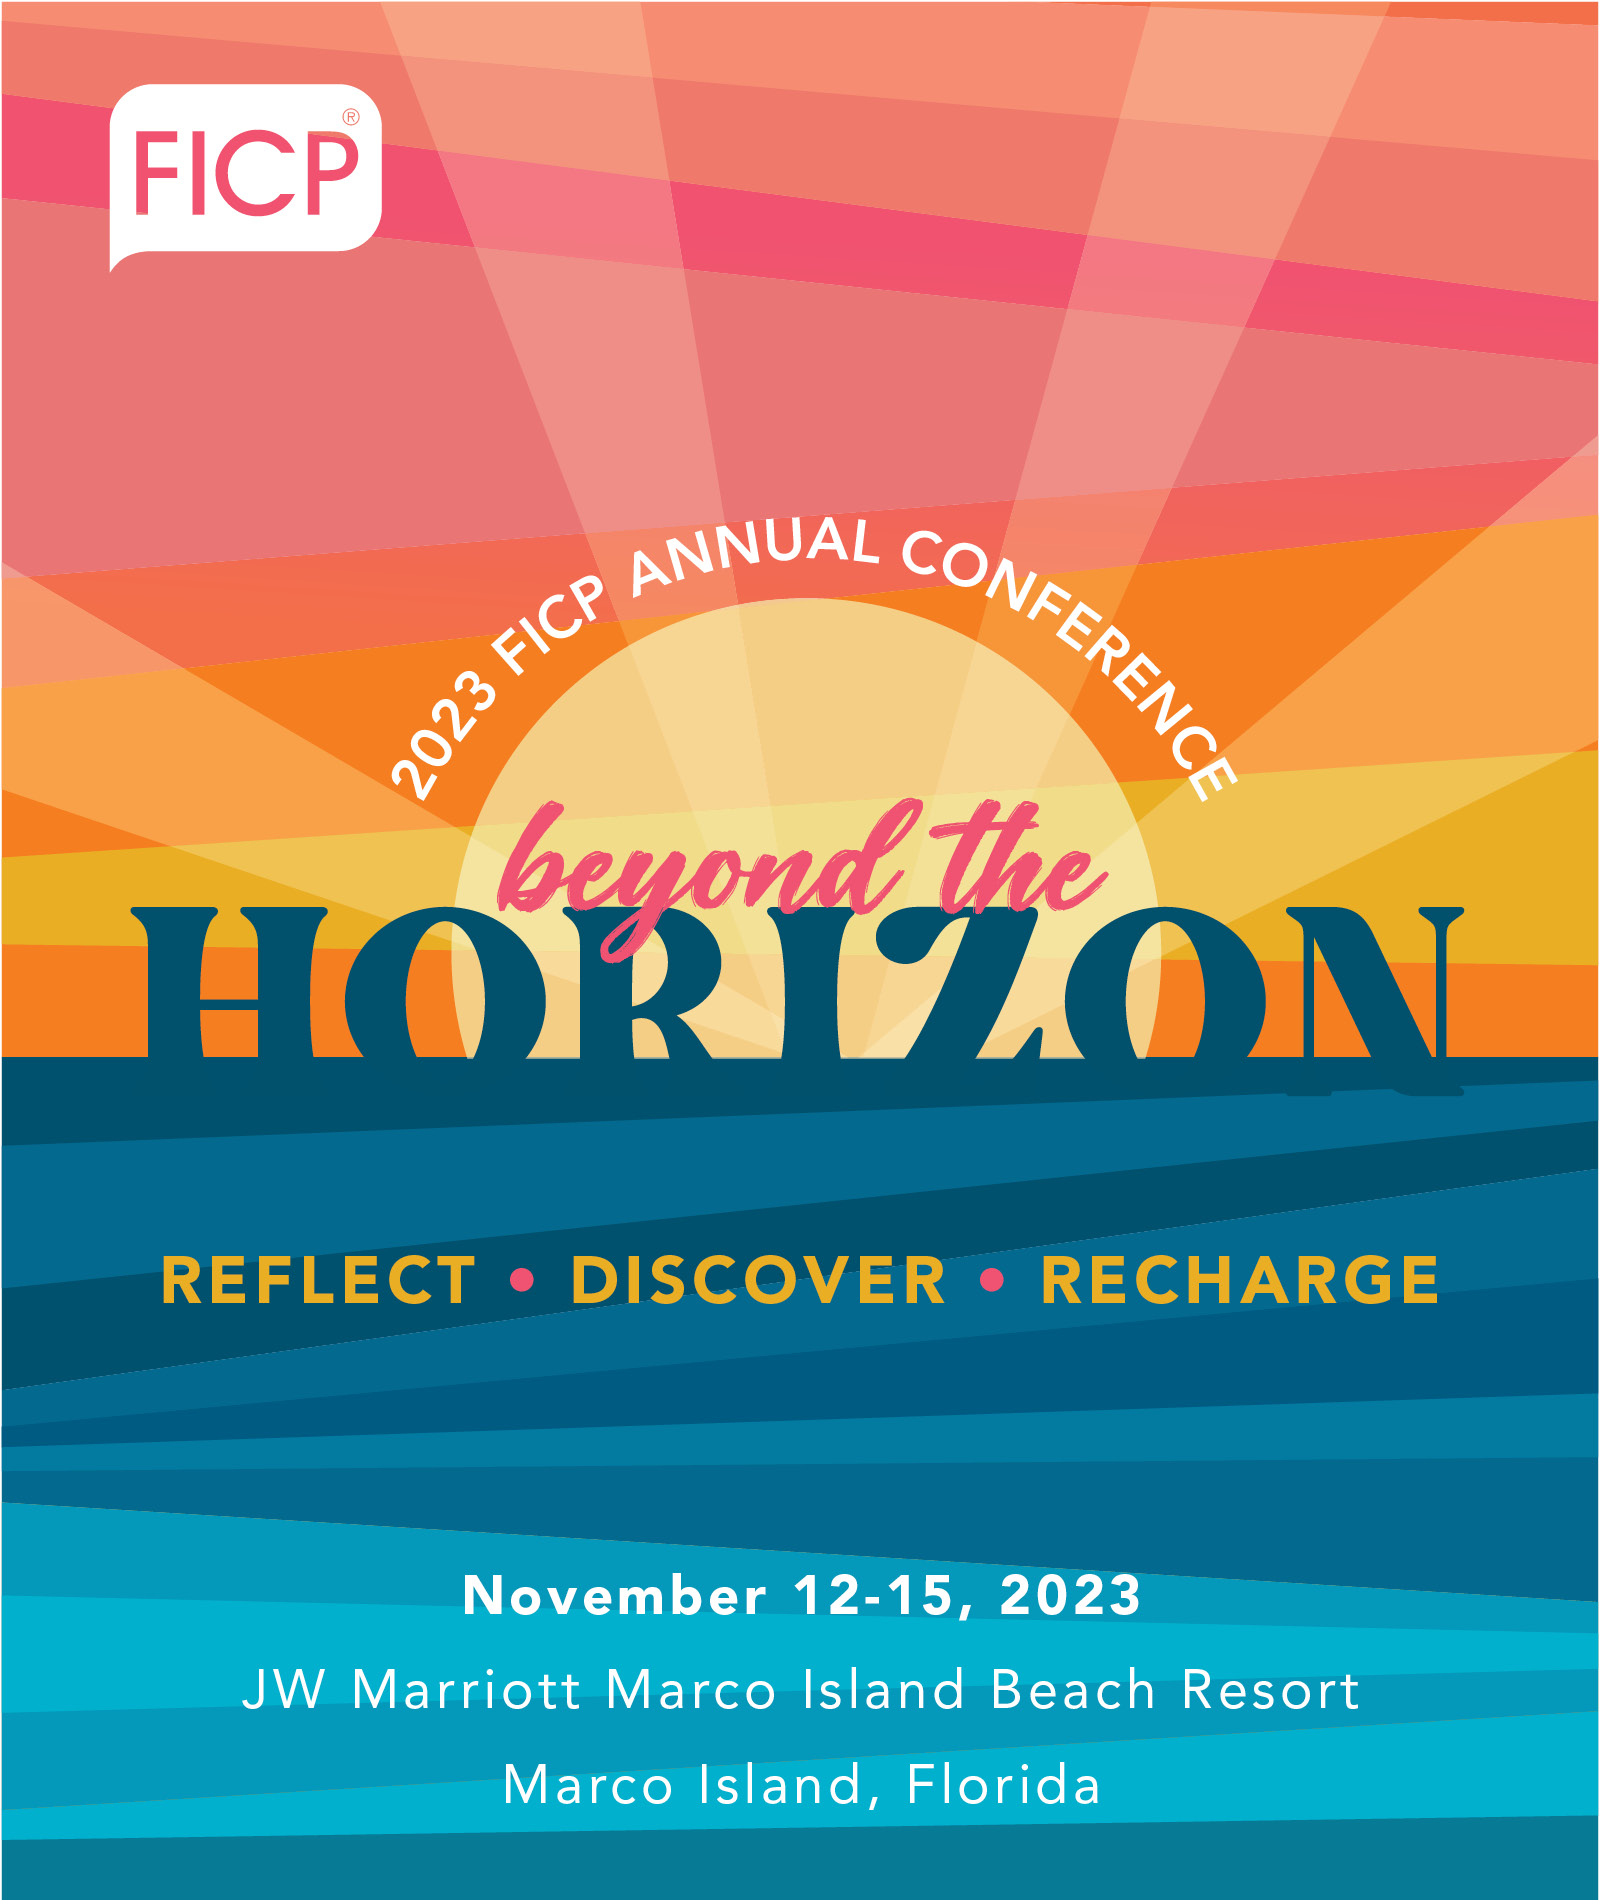 Images from 2022 FICP Annual Conference